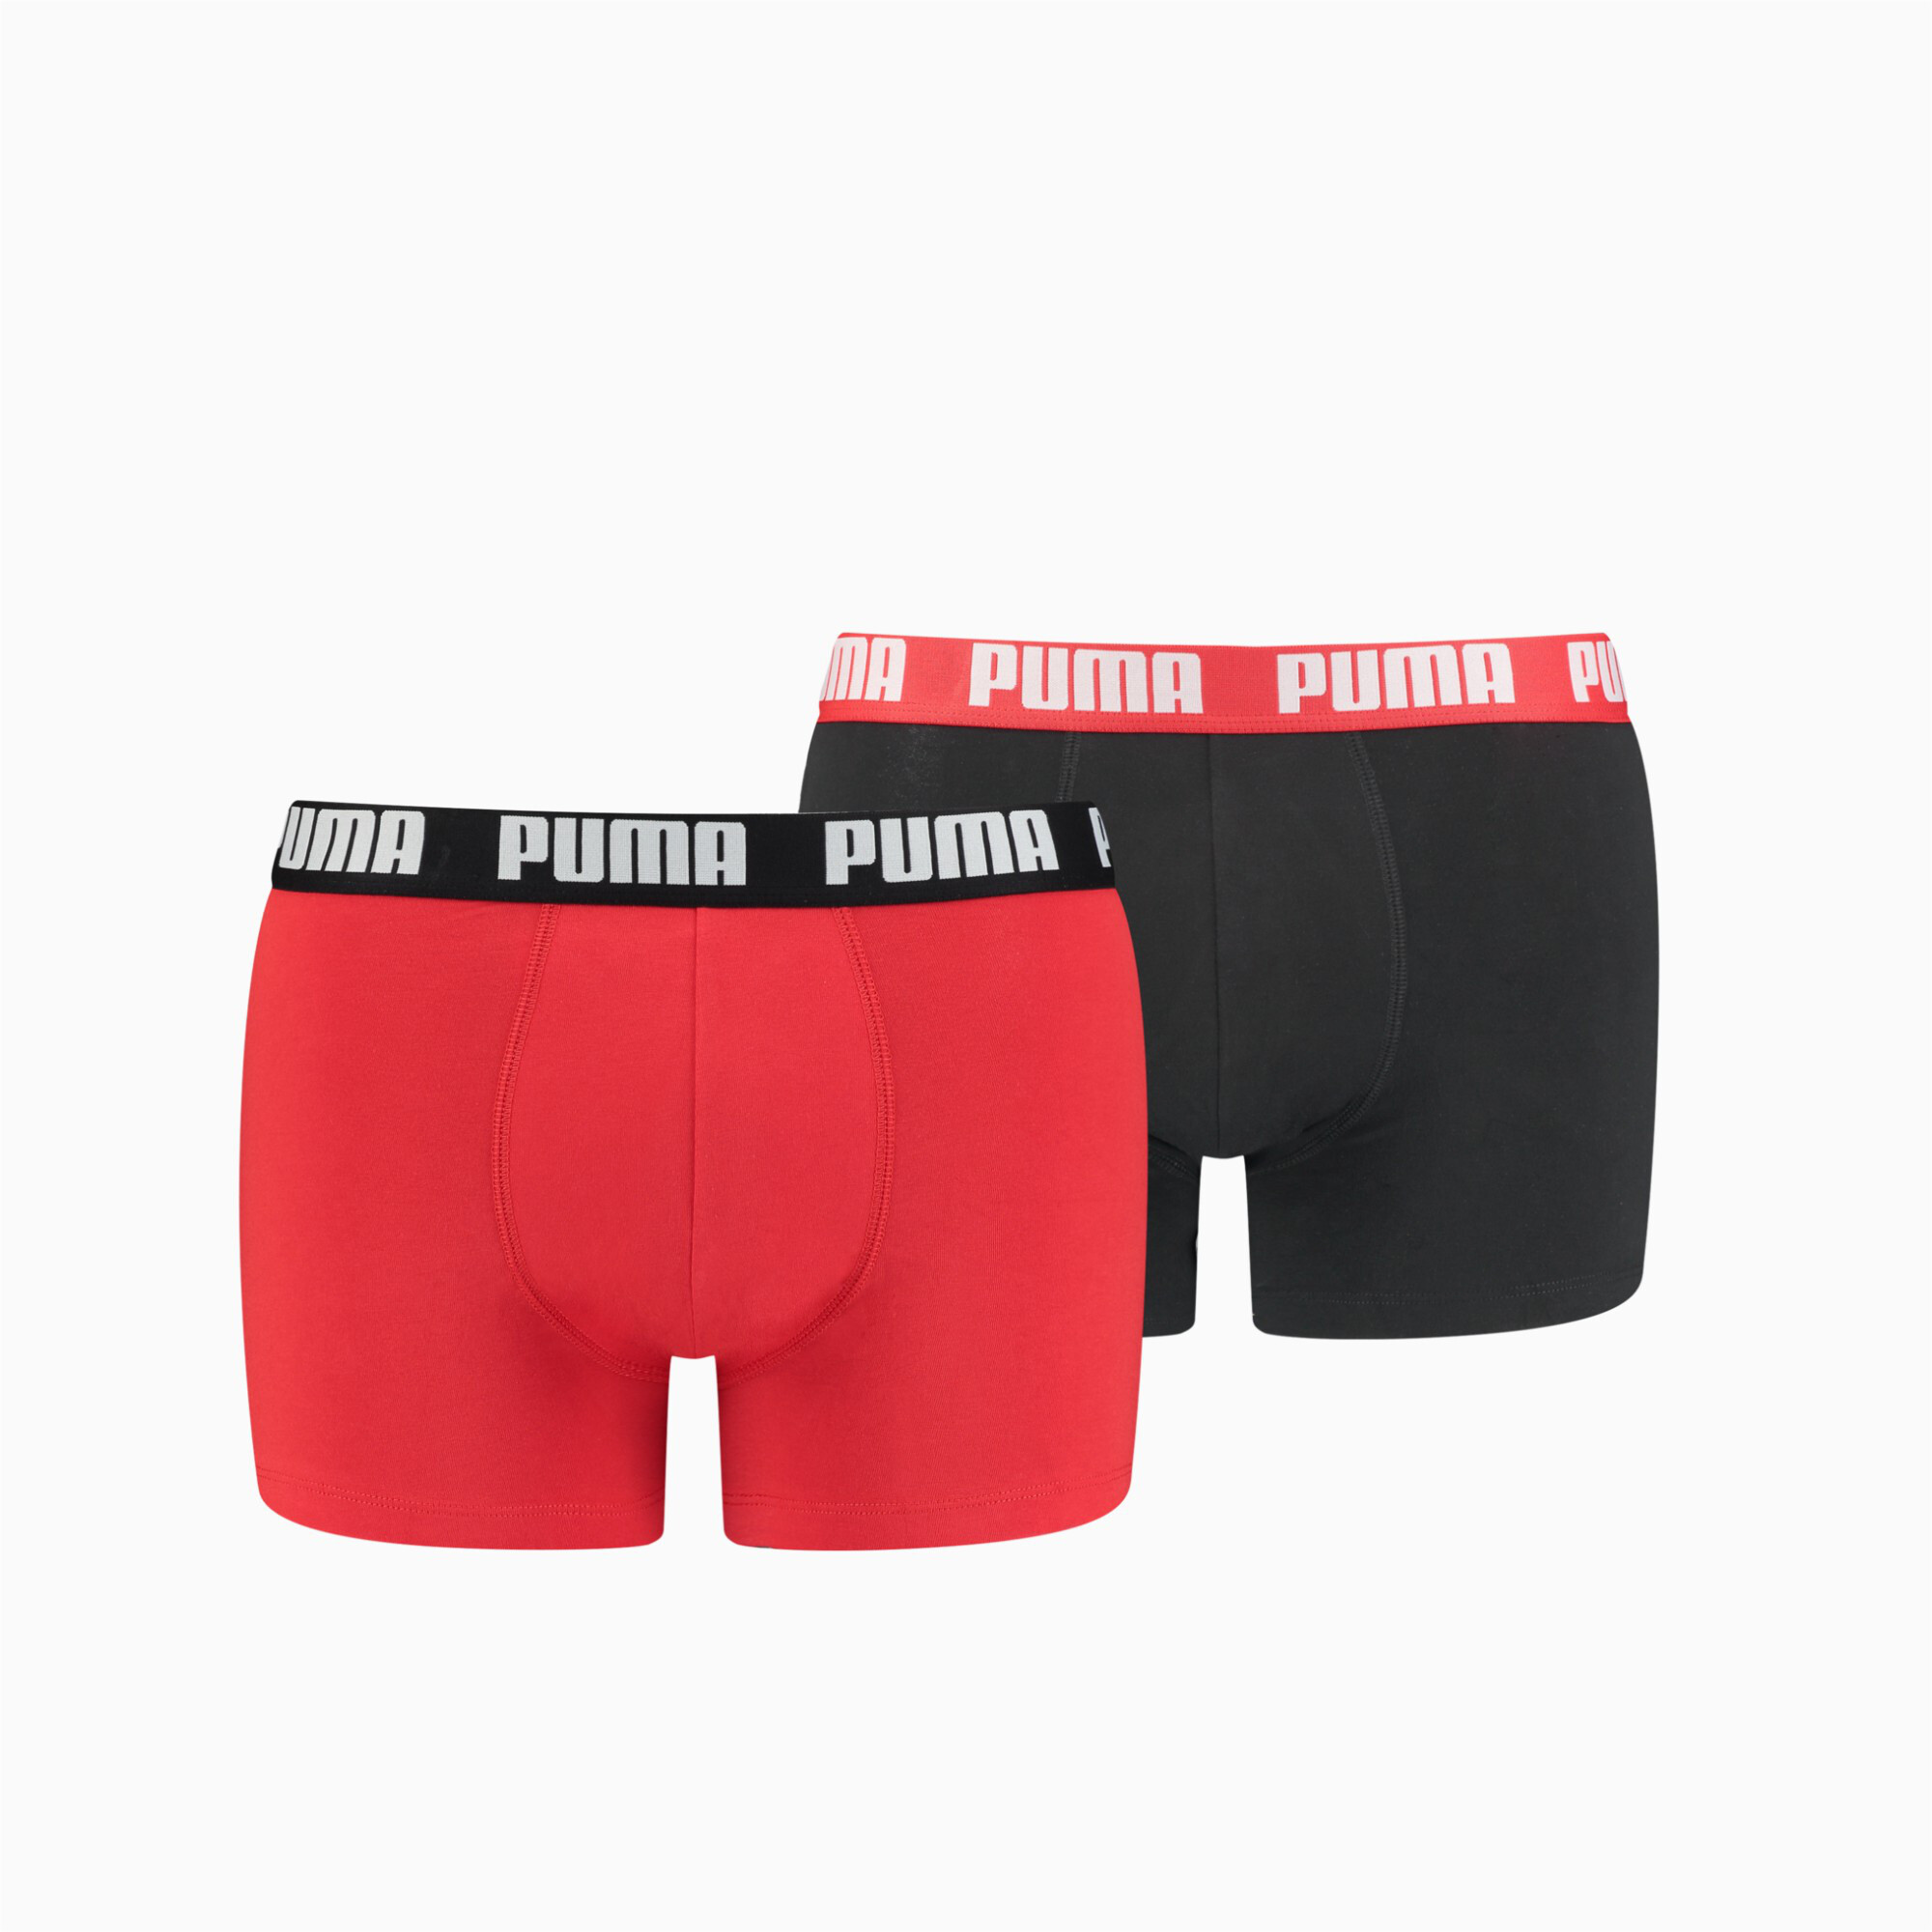 Men's PUMA Basic Boxers 2 Pack In Red, Size XL